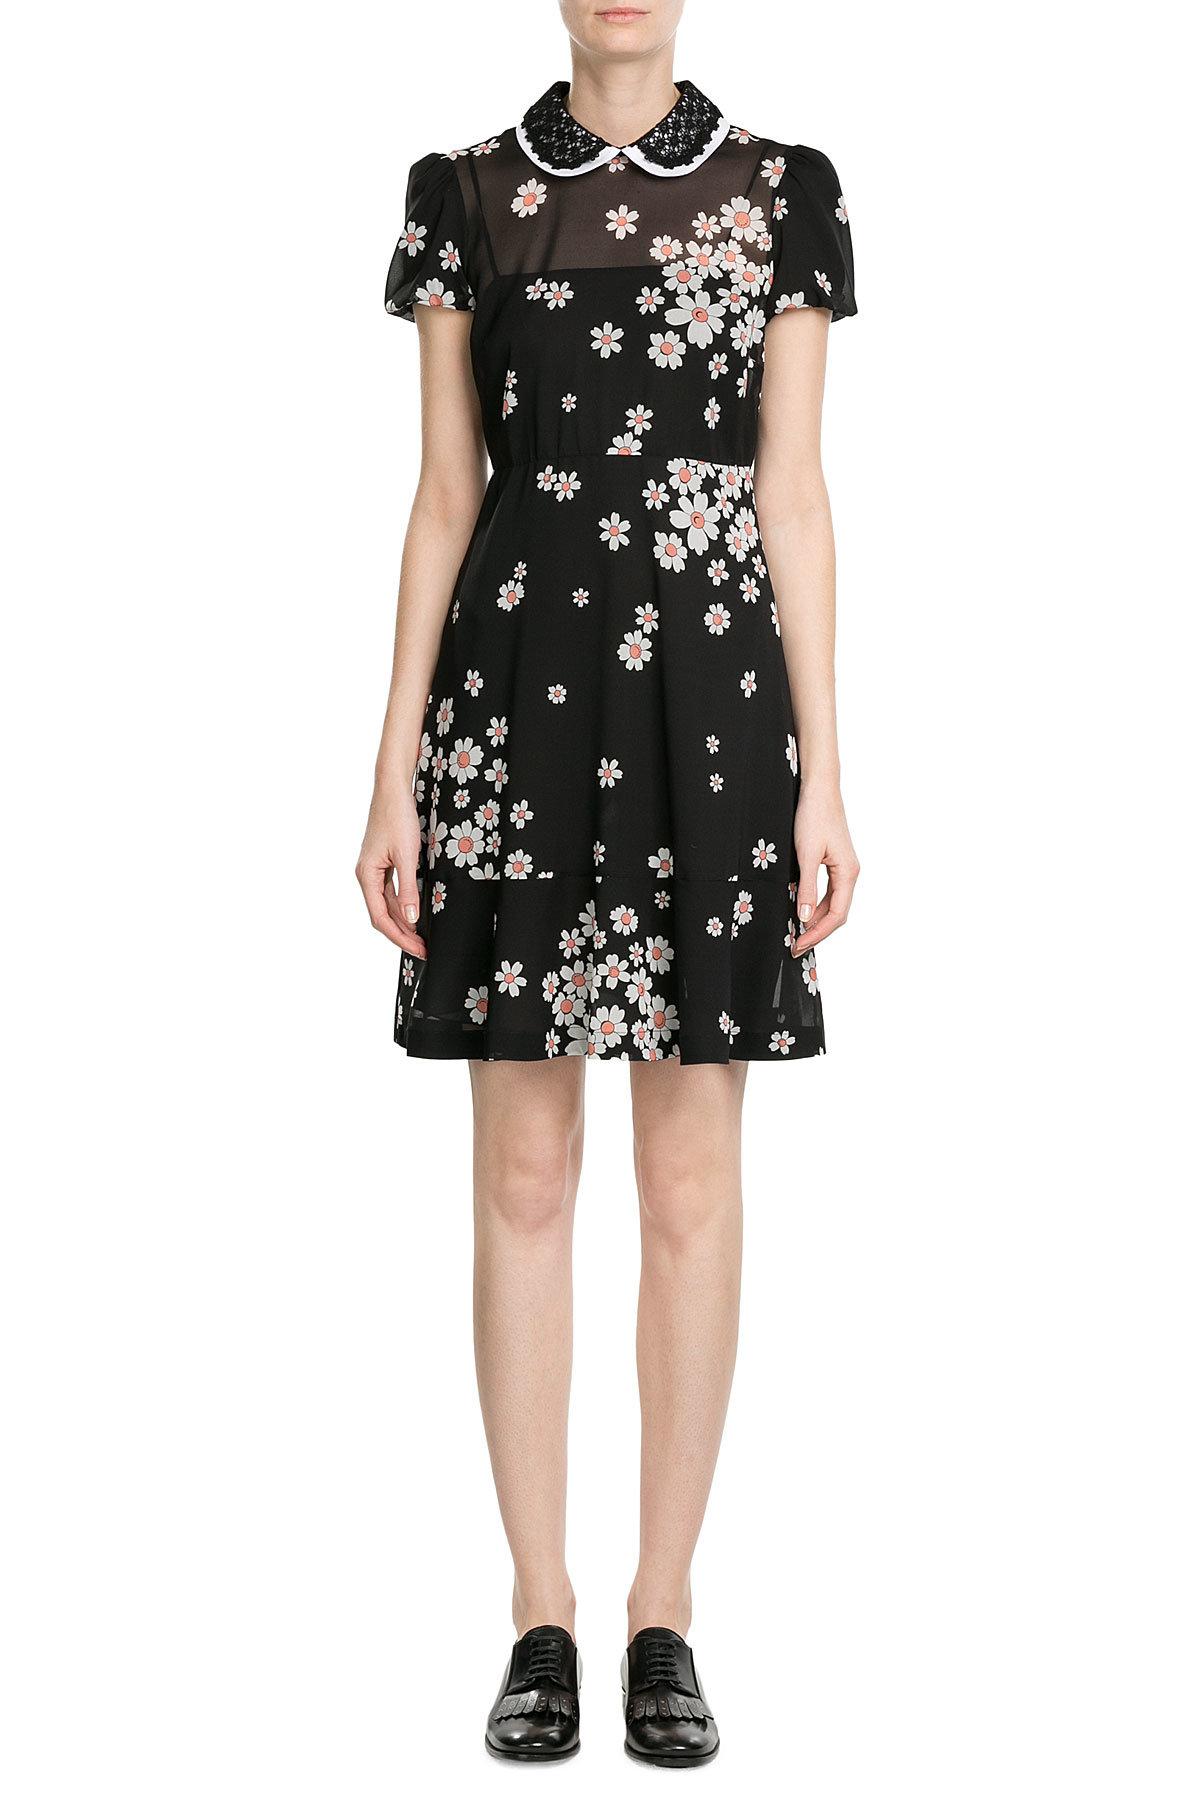 Red valentino Floral Print Dress in Black - Save 48% | Lyst